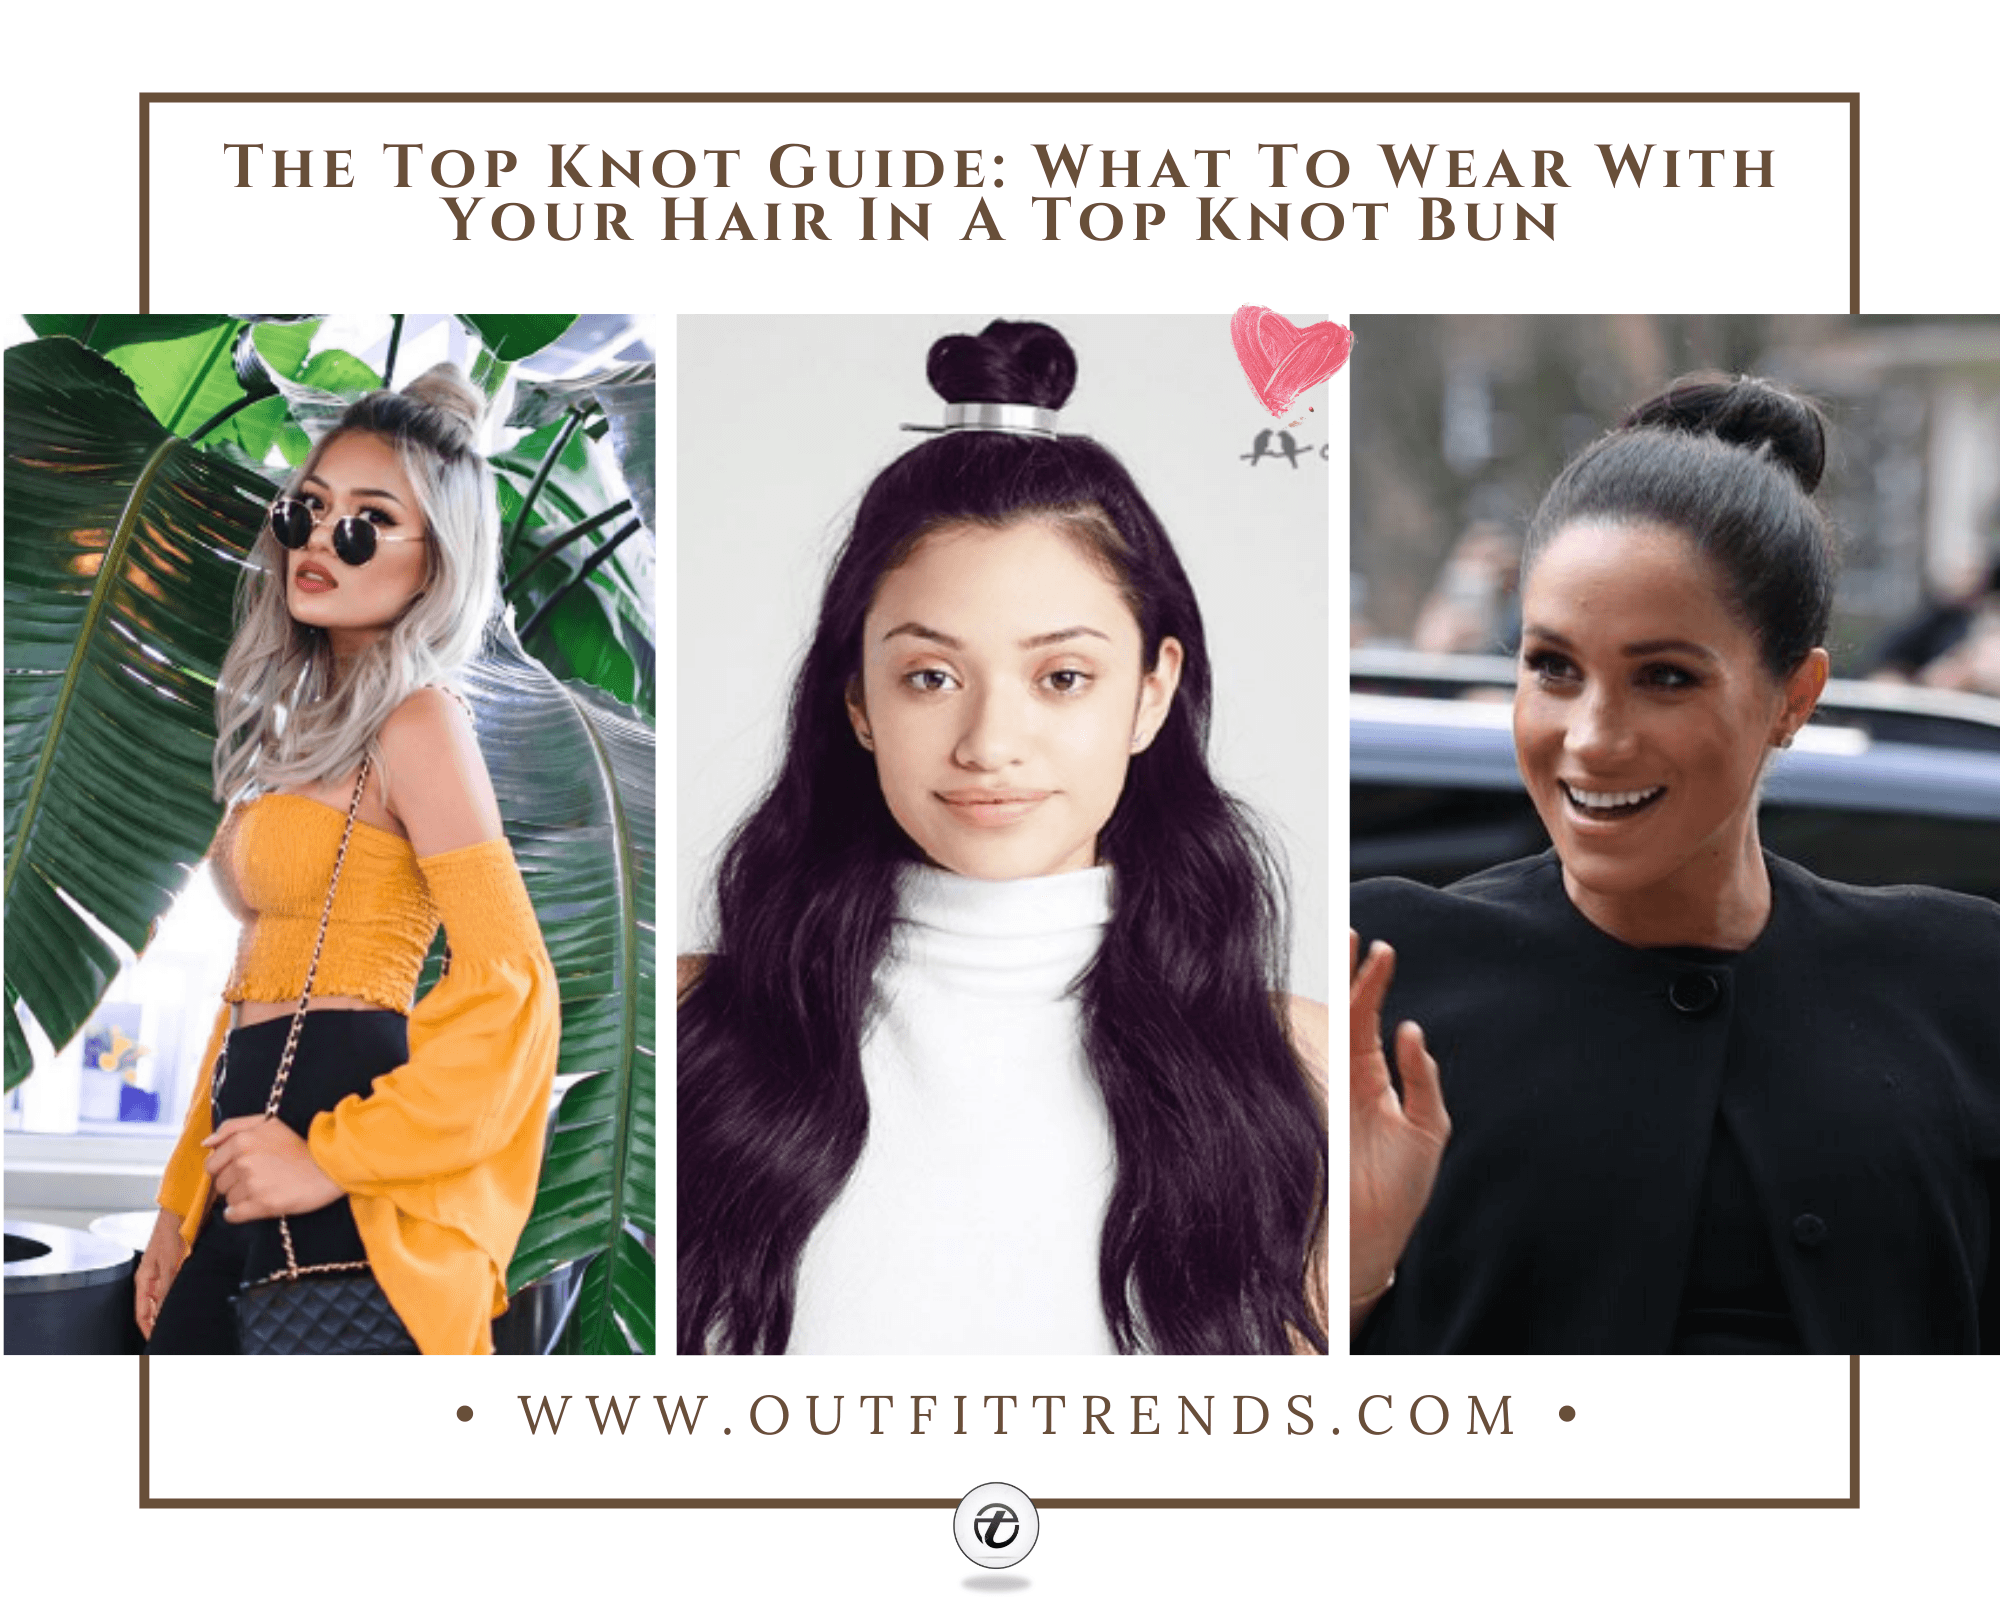 24 Cute Outfits with Top Bun Hairstyle to Compliment Style